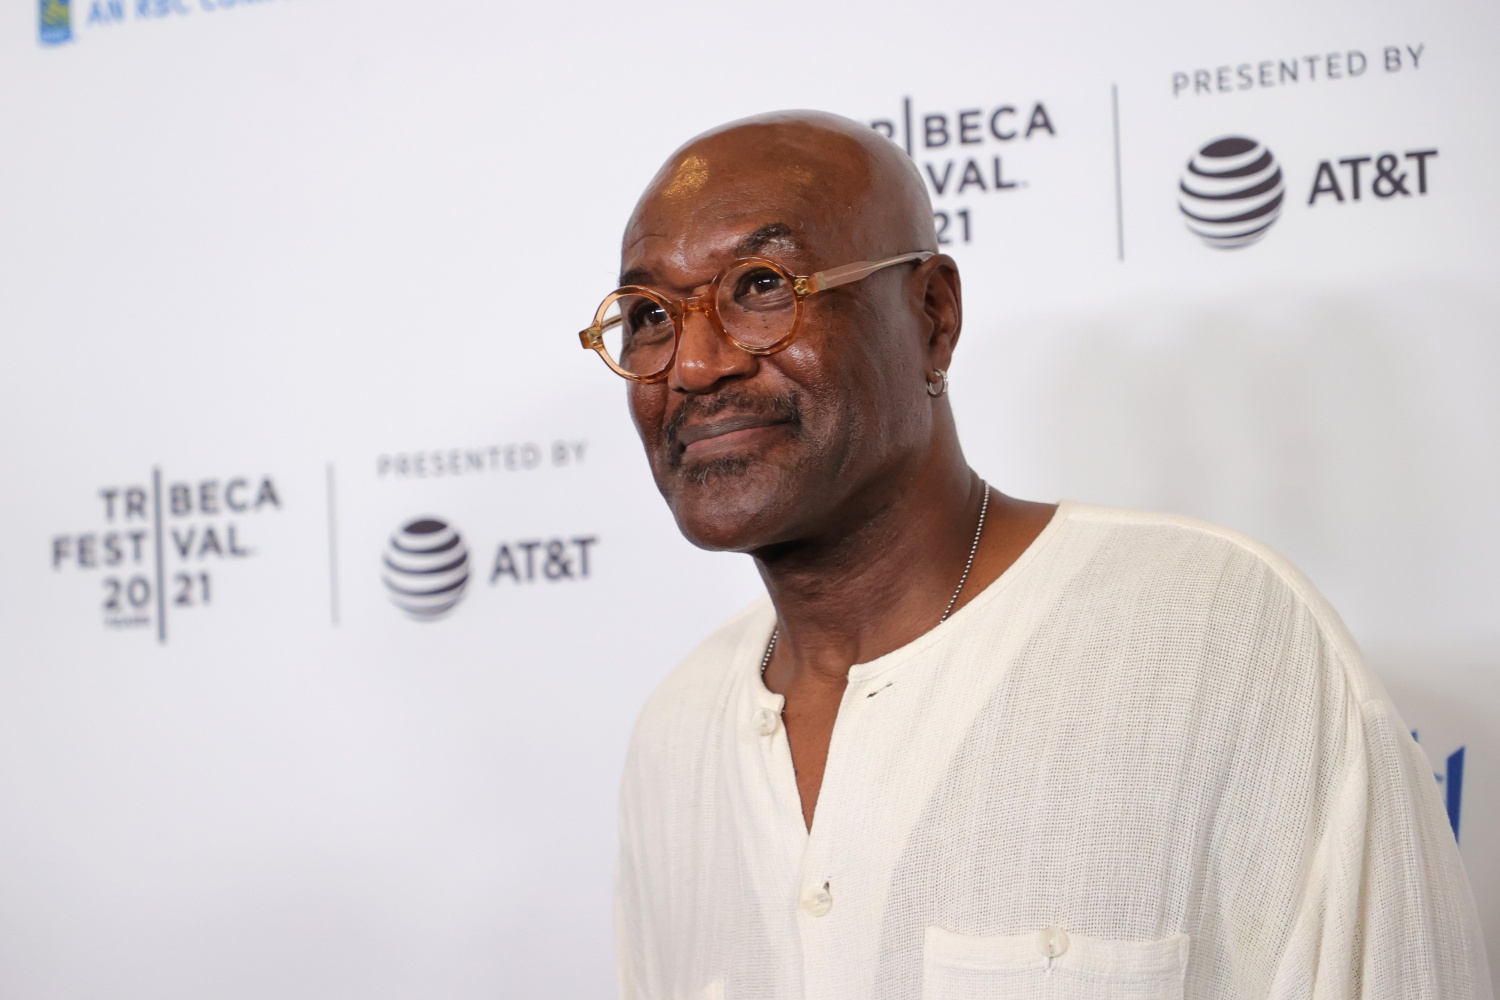 Delroy Lindo "Untitled: Dave Chappelle Documentary" Premiere - 2021 Tribeca Festival